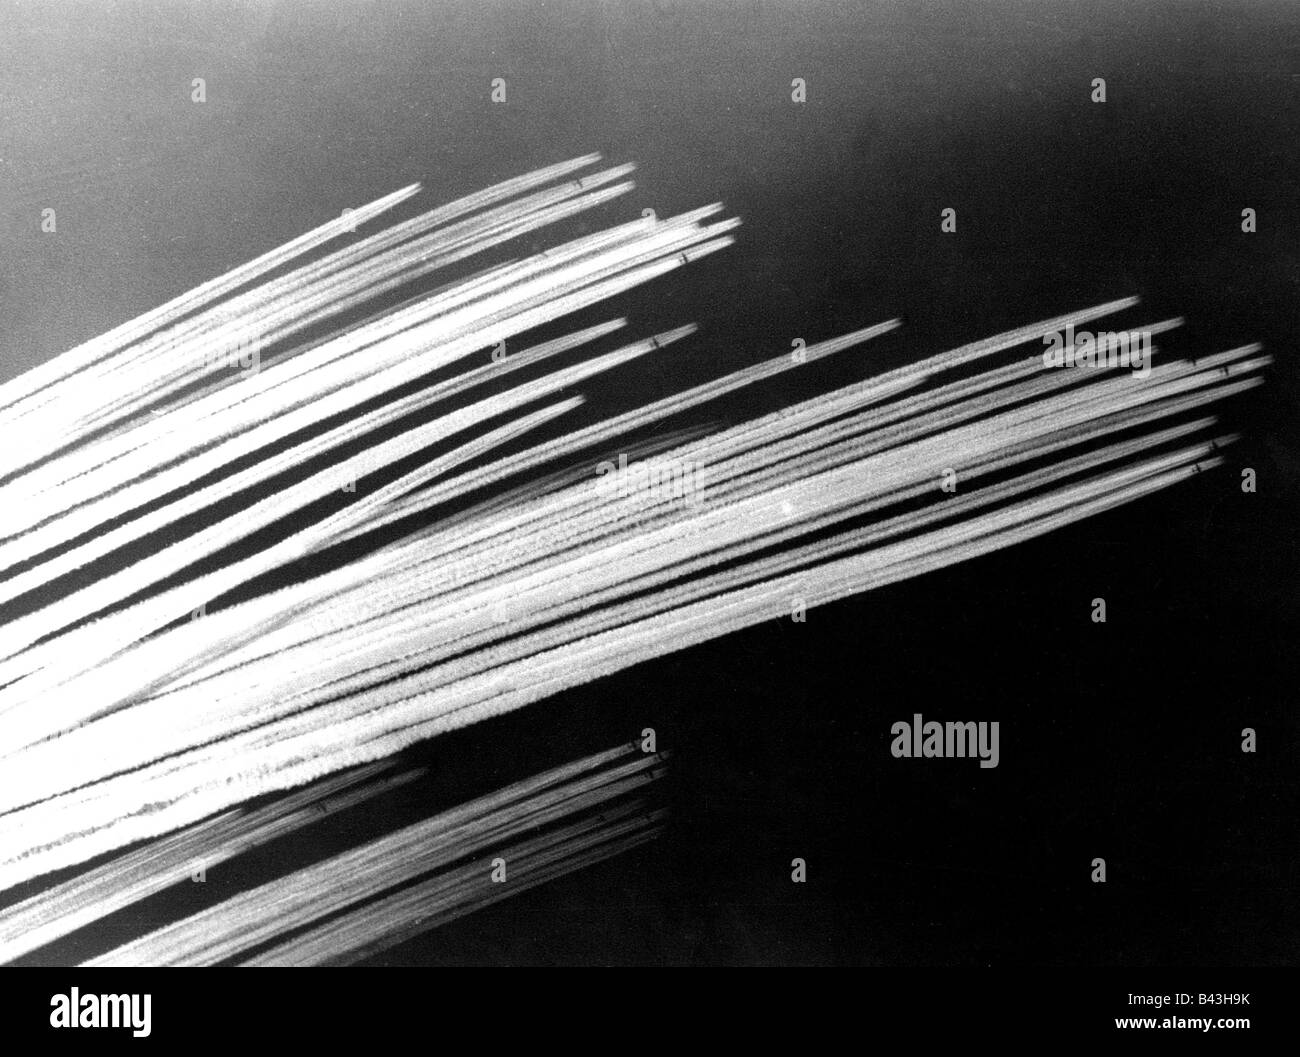 events, Second World War / WWII, aerial warfare, aircraft, US bomber formation in the air, condensation trails, circa 1943 / 1944, Stock Photo